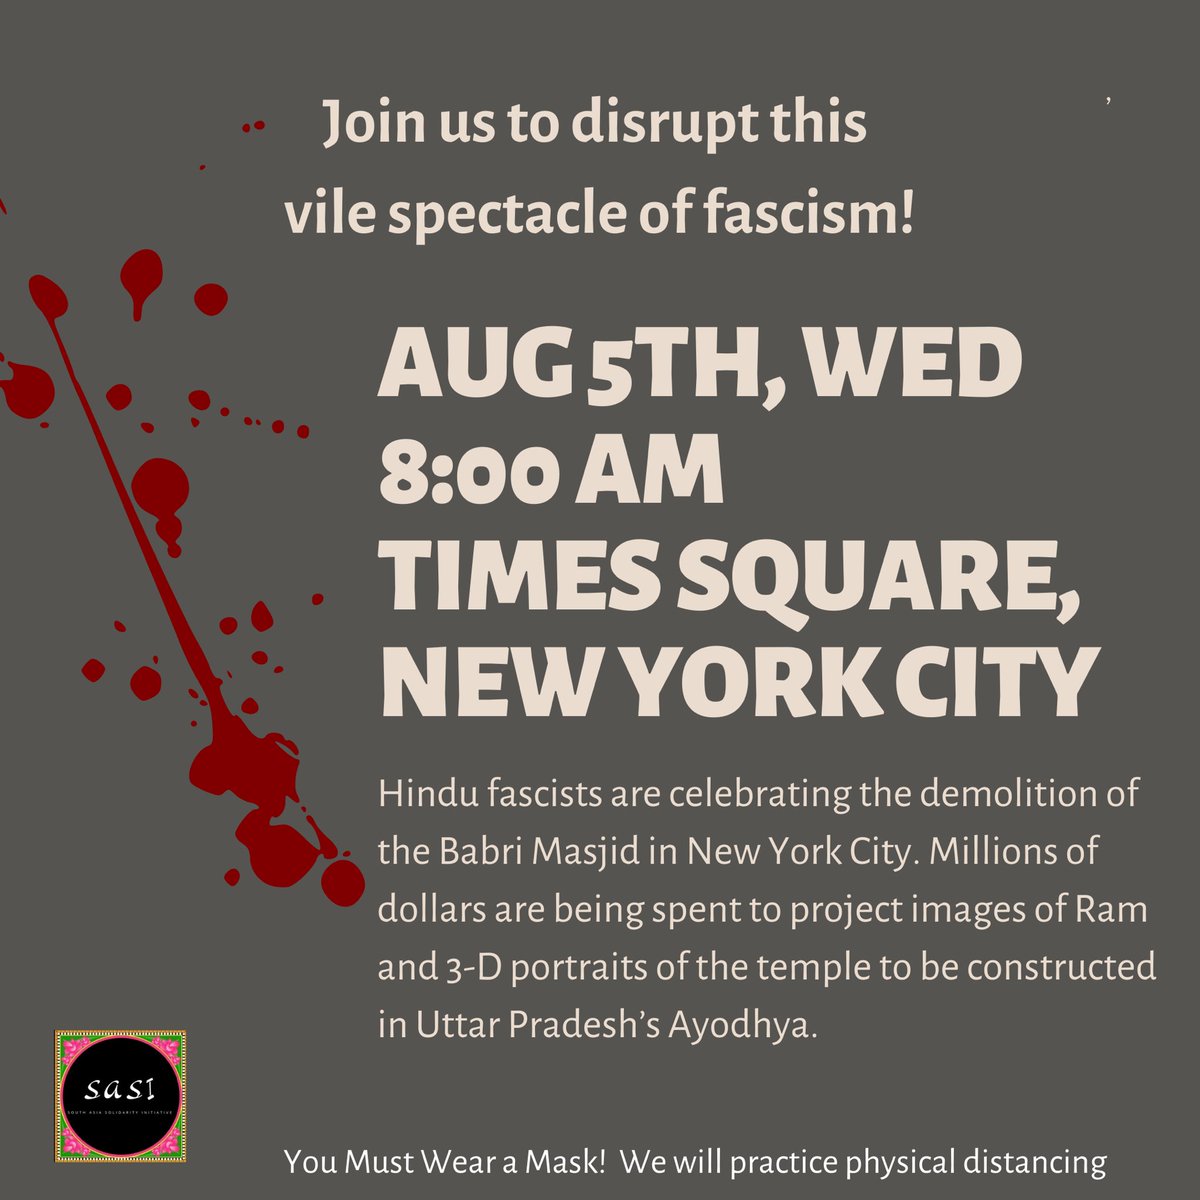 NYC FOLKS  Wednesday, August 5. 8 AM. Times Square. Hindu fascists will be celebrating the demolition of Babri Masjid. Join us to protest this vile spectacle of fascism! *You most wear a mask and make sure to practice physical distancing as much as possible during the protest